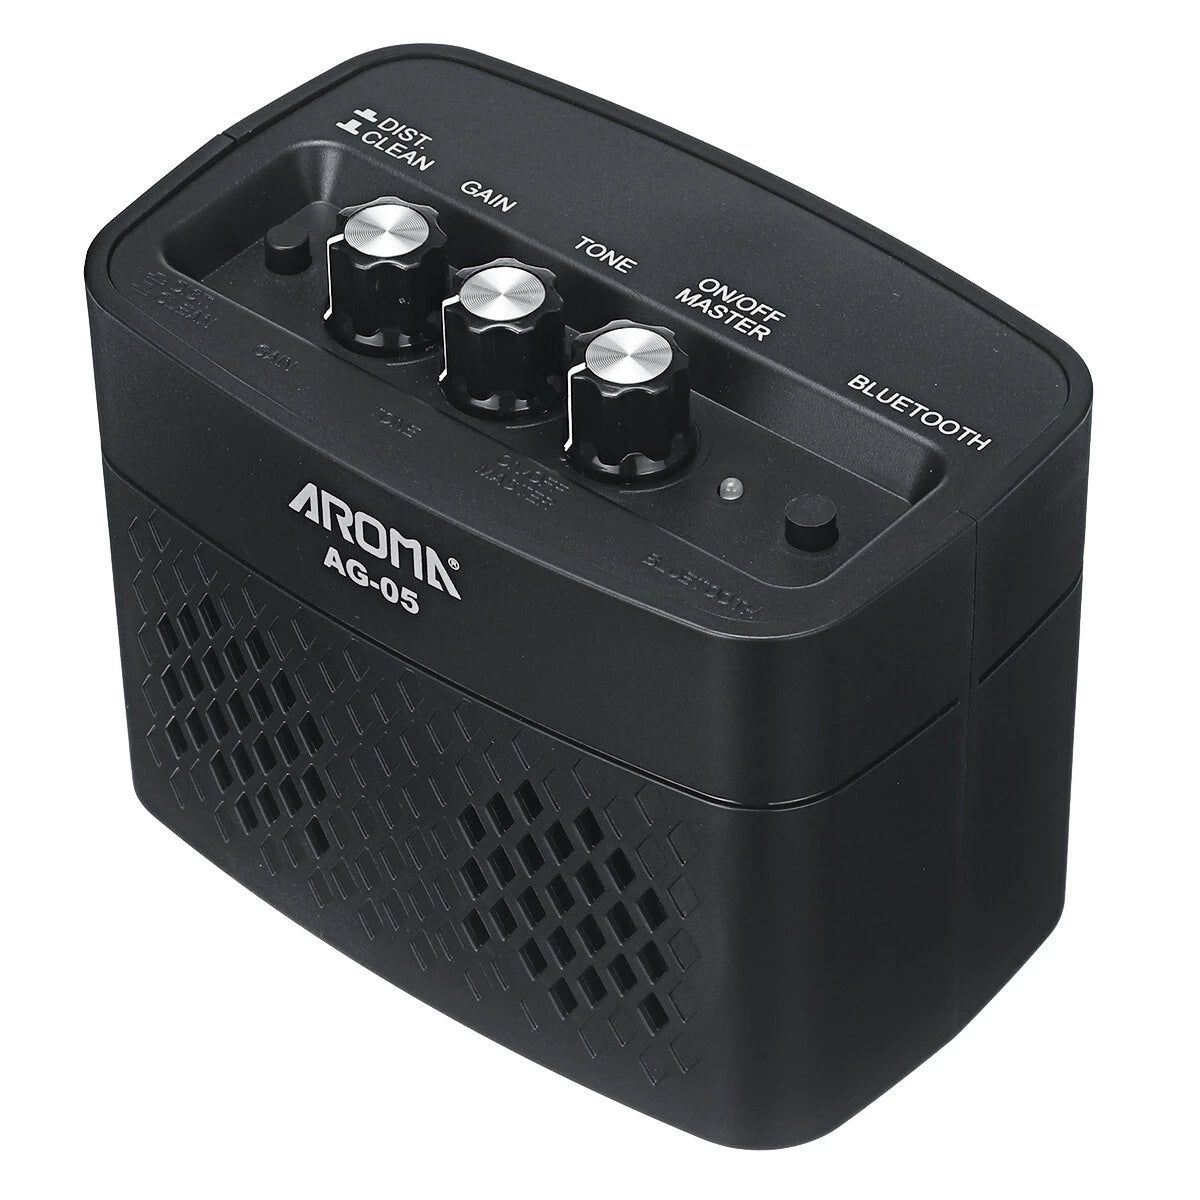 Amplifier Aroma AG-05, Combo - Việt Music